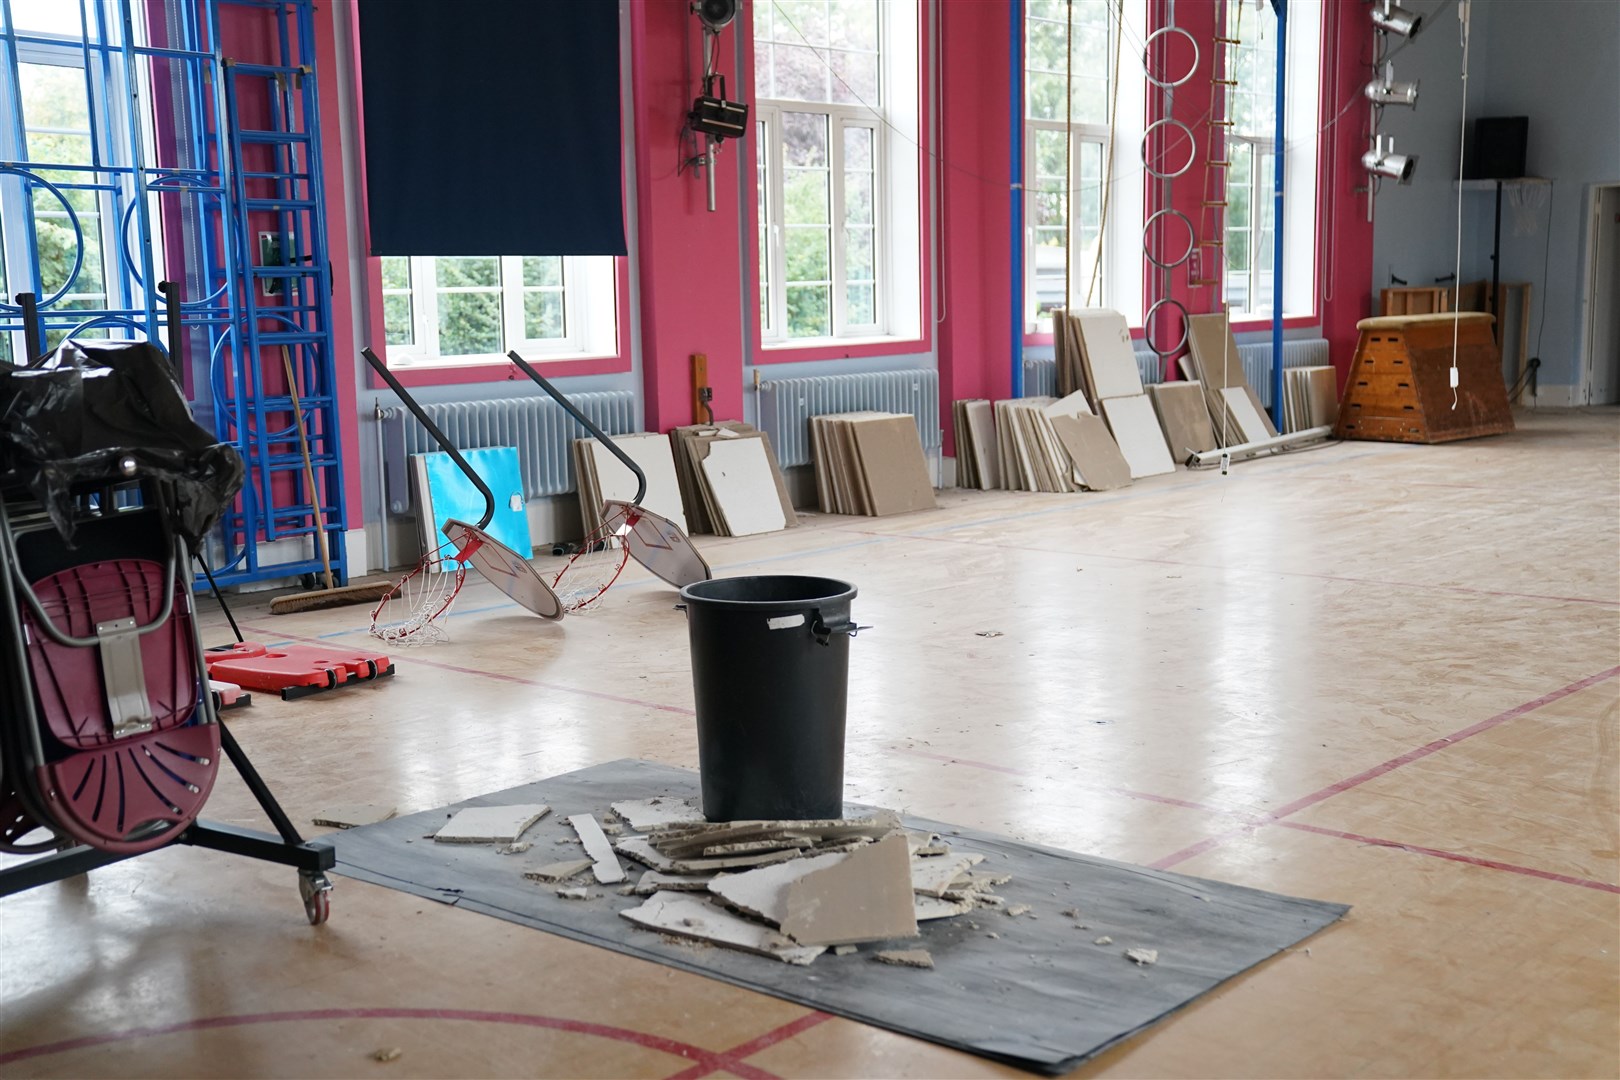 Damage inside Parks Primary School in Leicester (Jacob King/PA)